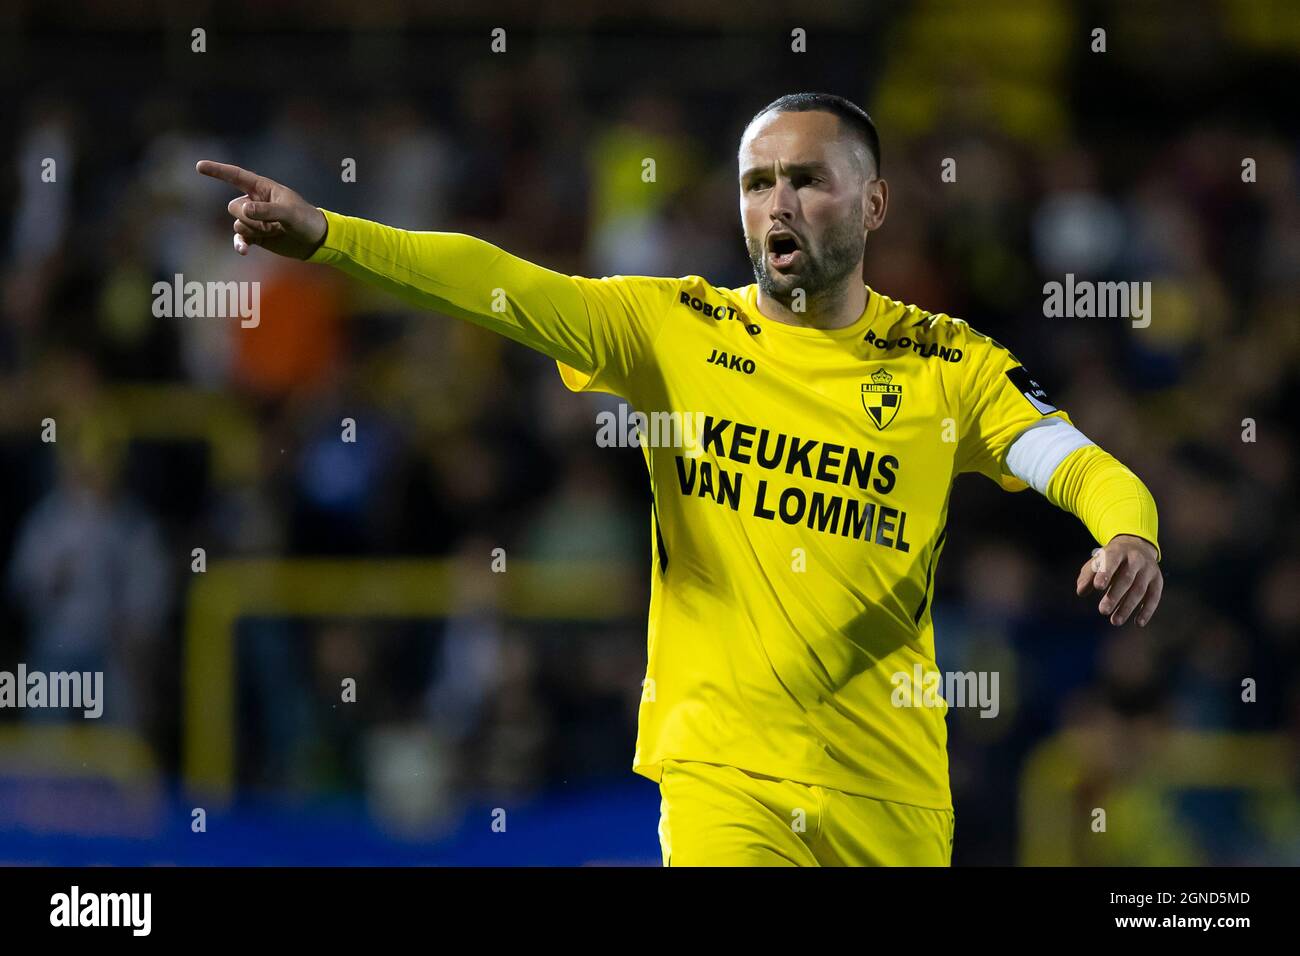 Lierse's Alexander Maes pictured during a soccer match between Lierse Kempenzonen and Waasland-Beveren, Friday 24 September 2021 in Lier, on day 6 of Stock Photo